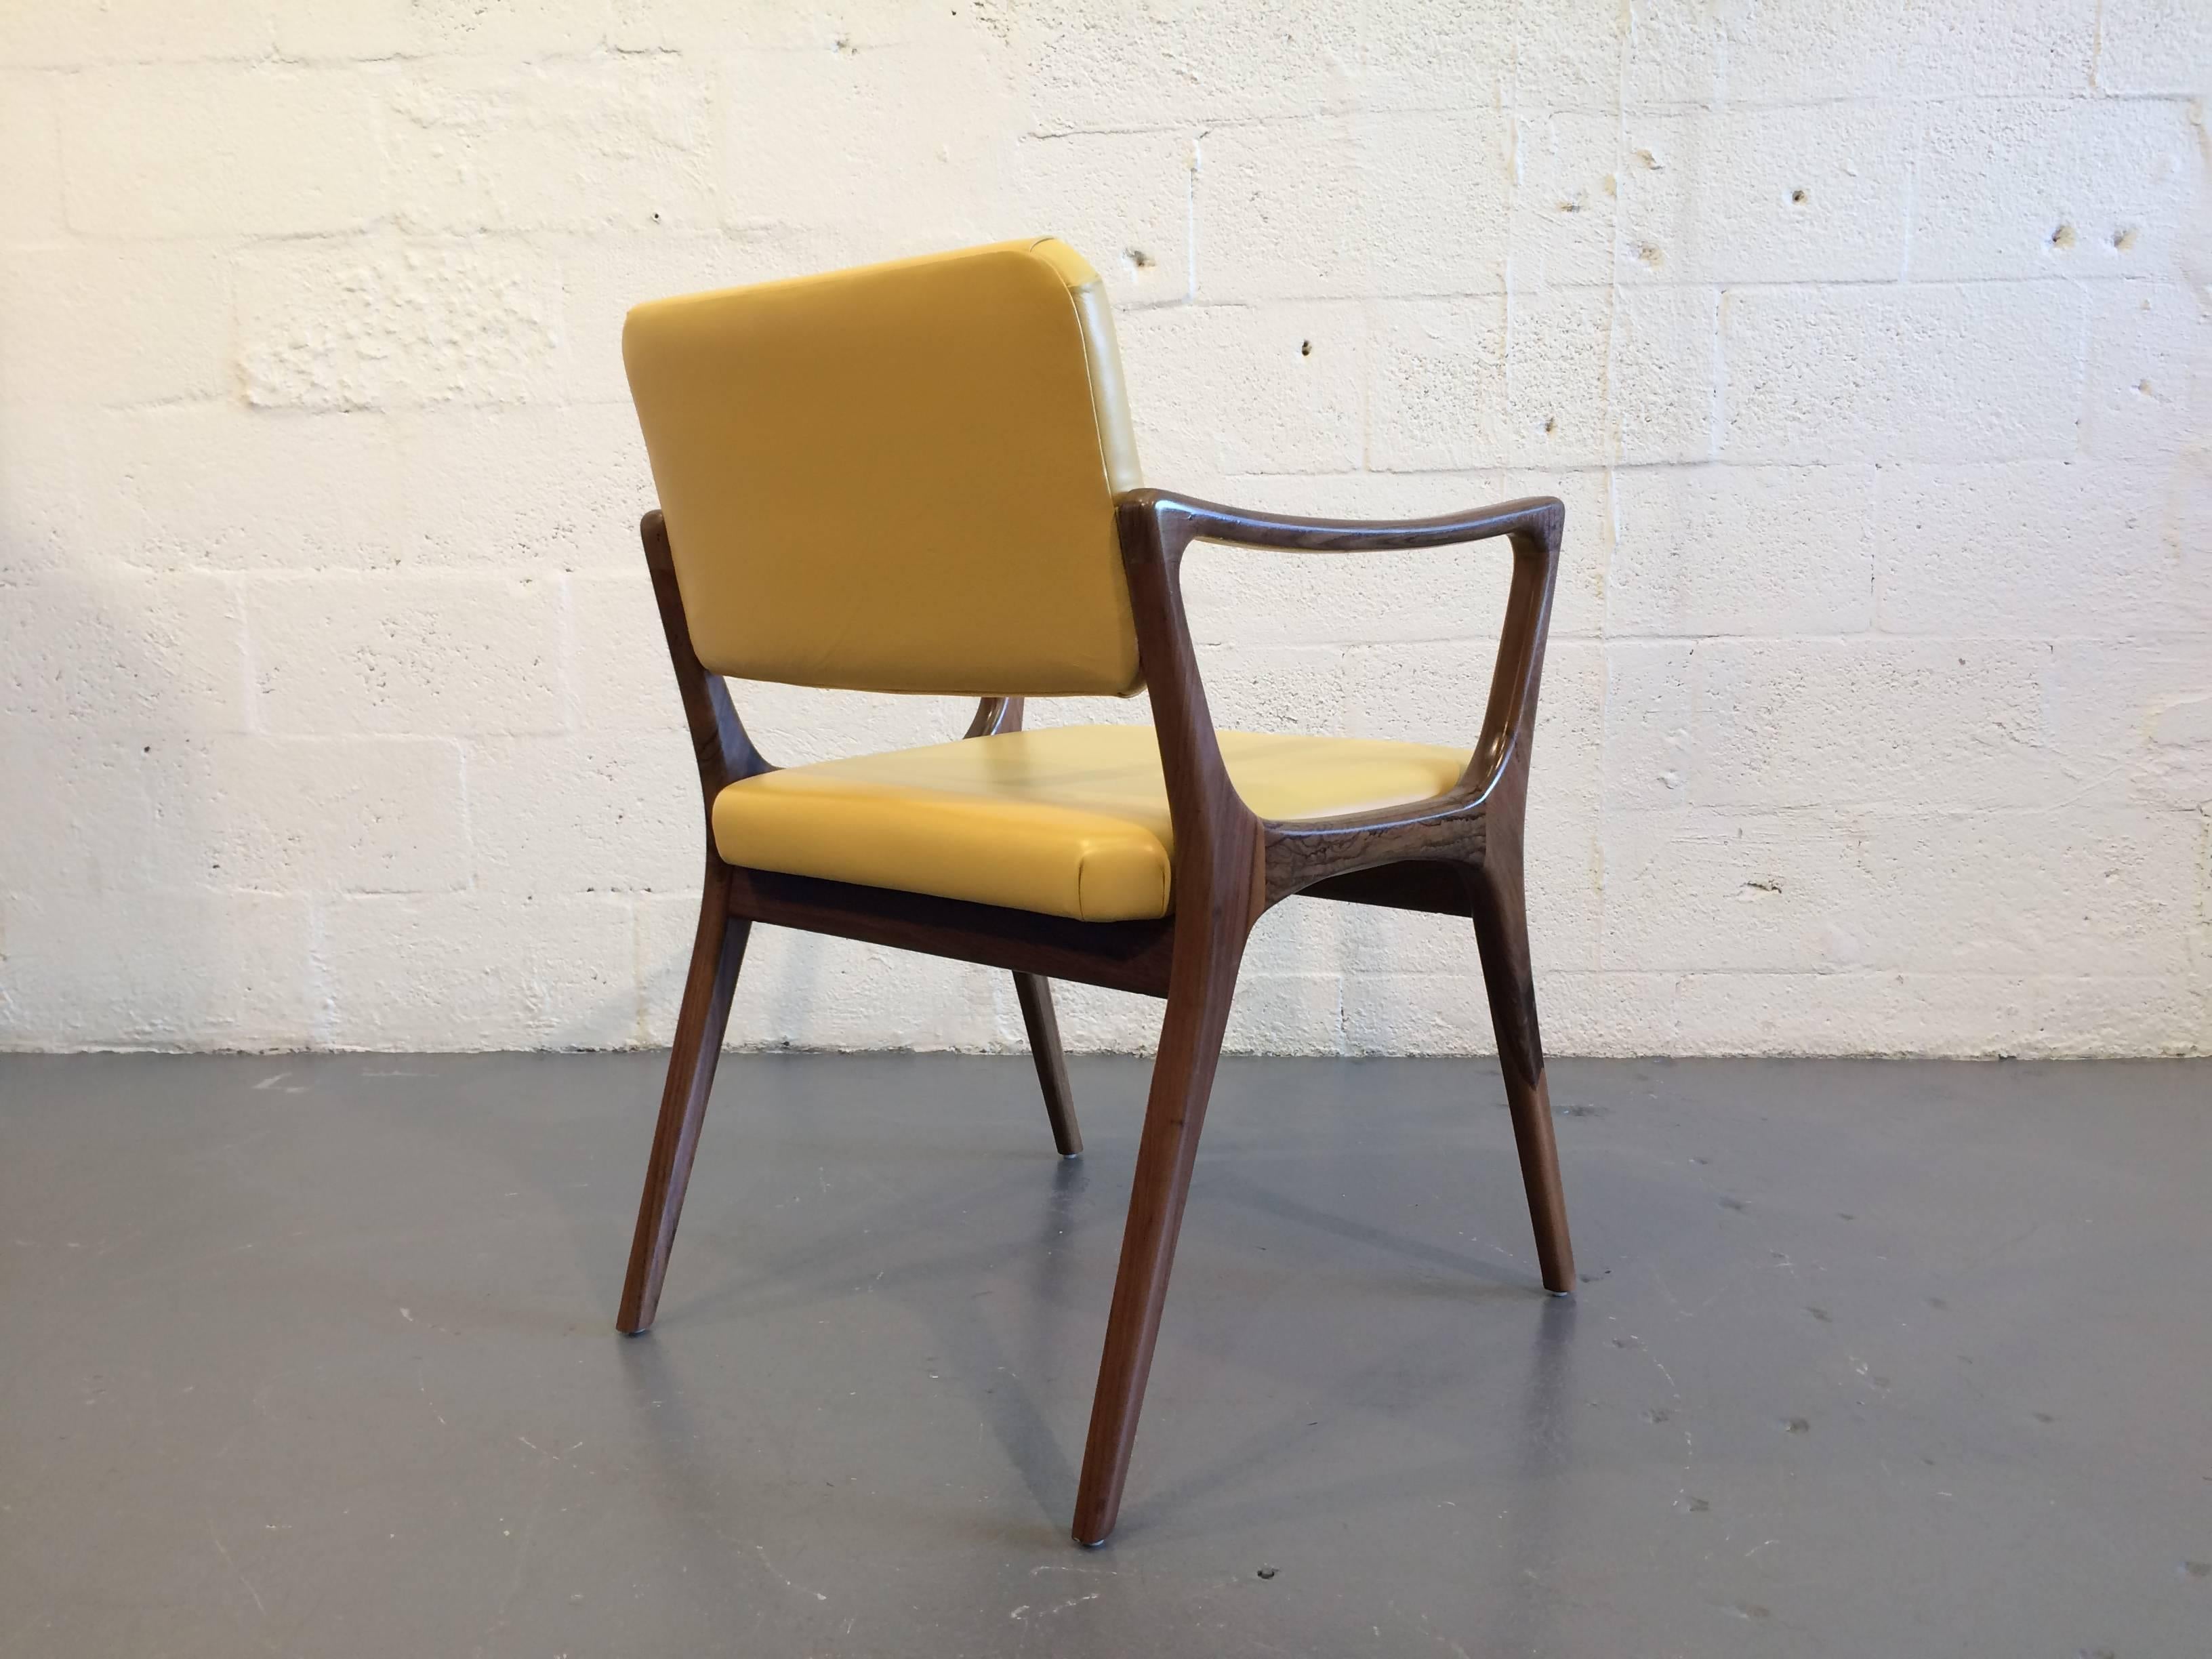 Six Sculptural Dining Chairs, Gio Ponti Style 1